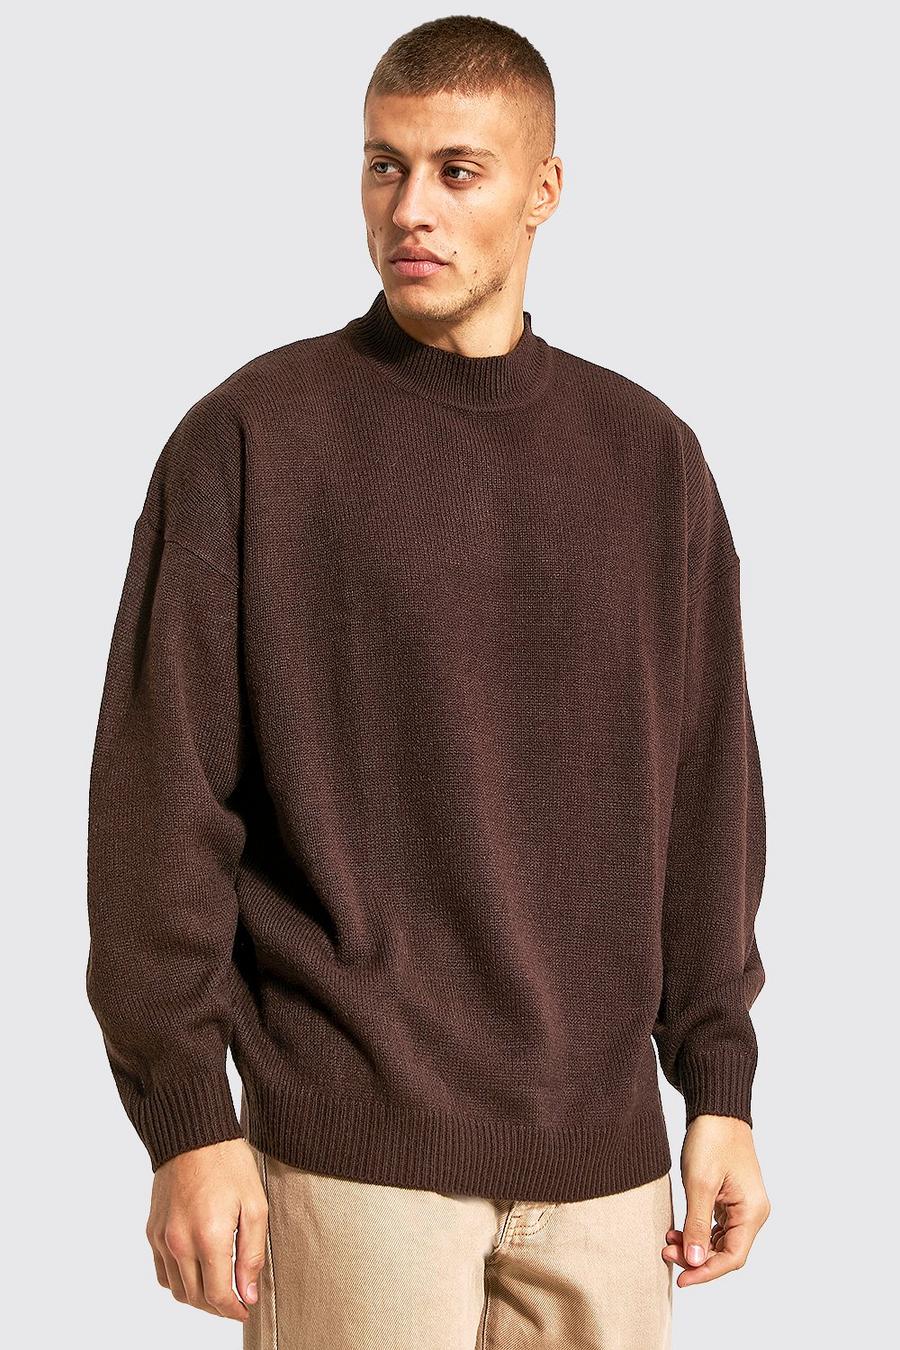 Chocolate brown Oversized Extended Neck Knitted Jumper